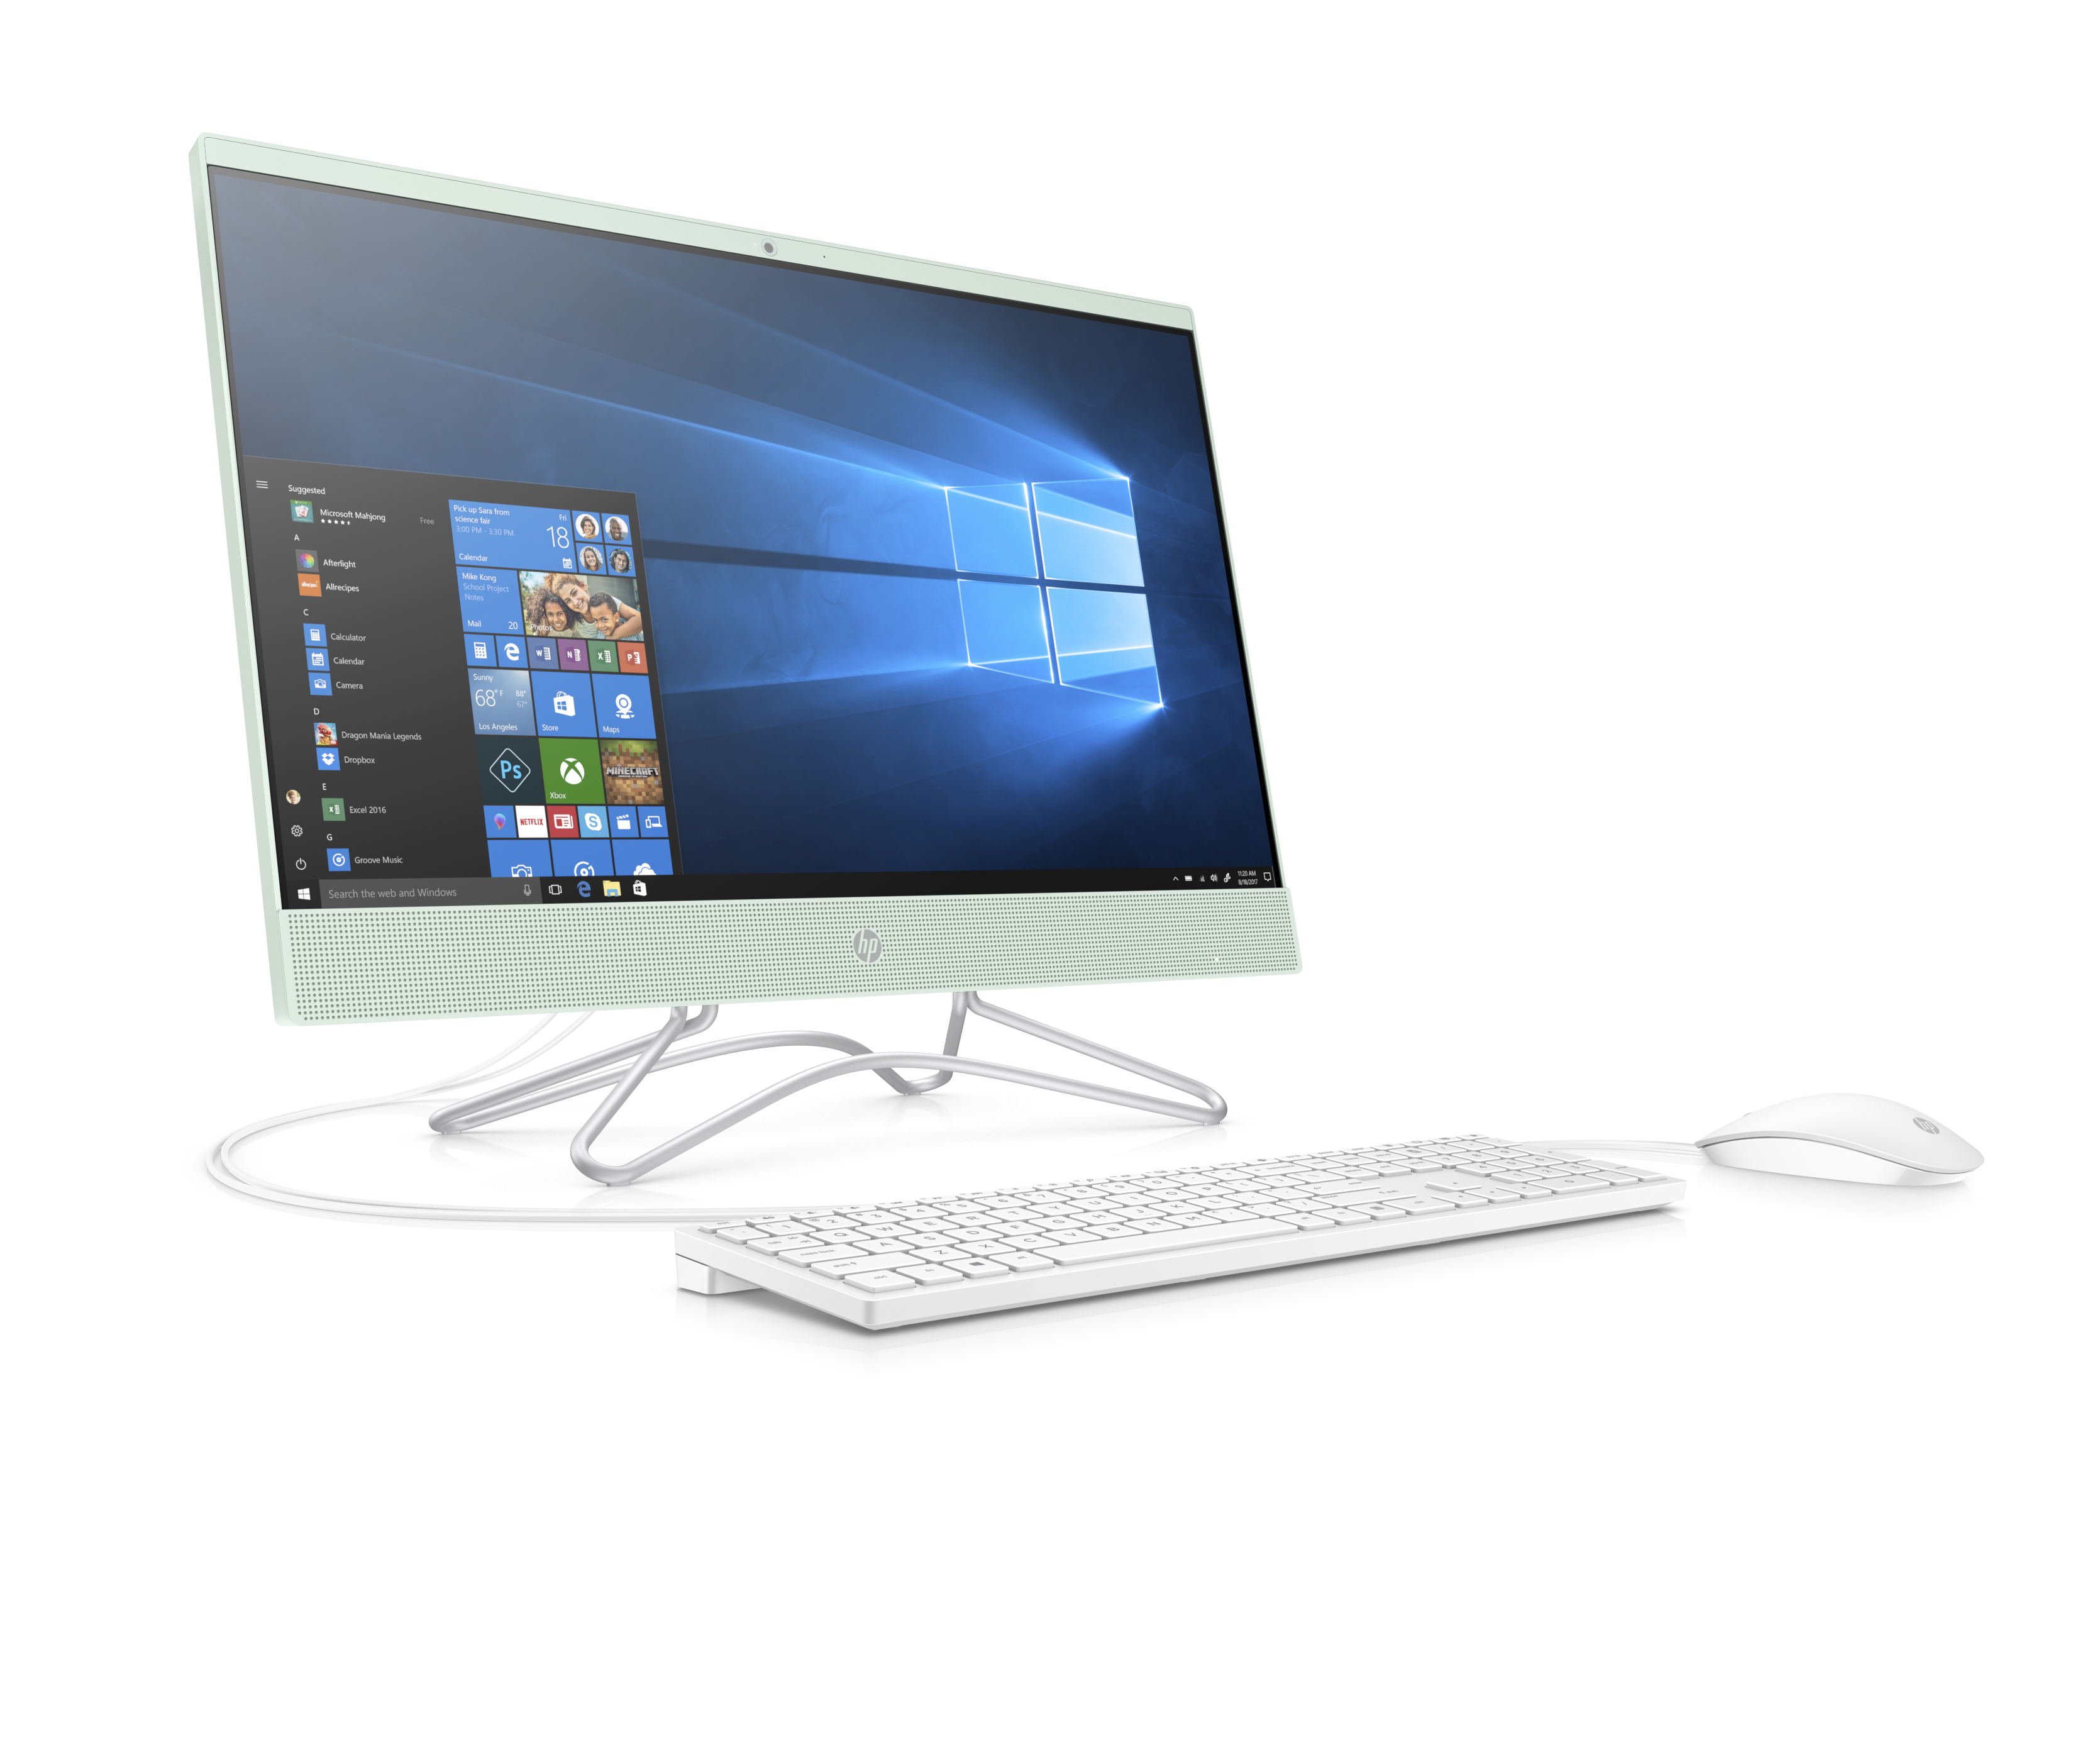 HP 22-c0073w All-in-One PC, 22" Display, Intel Celeron G4900T 2.9 GHz, 4GB RAM, 1TB HDD - image 2 of 5